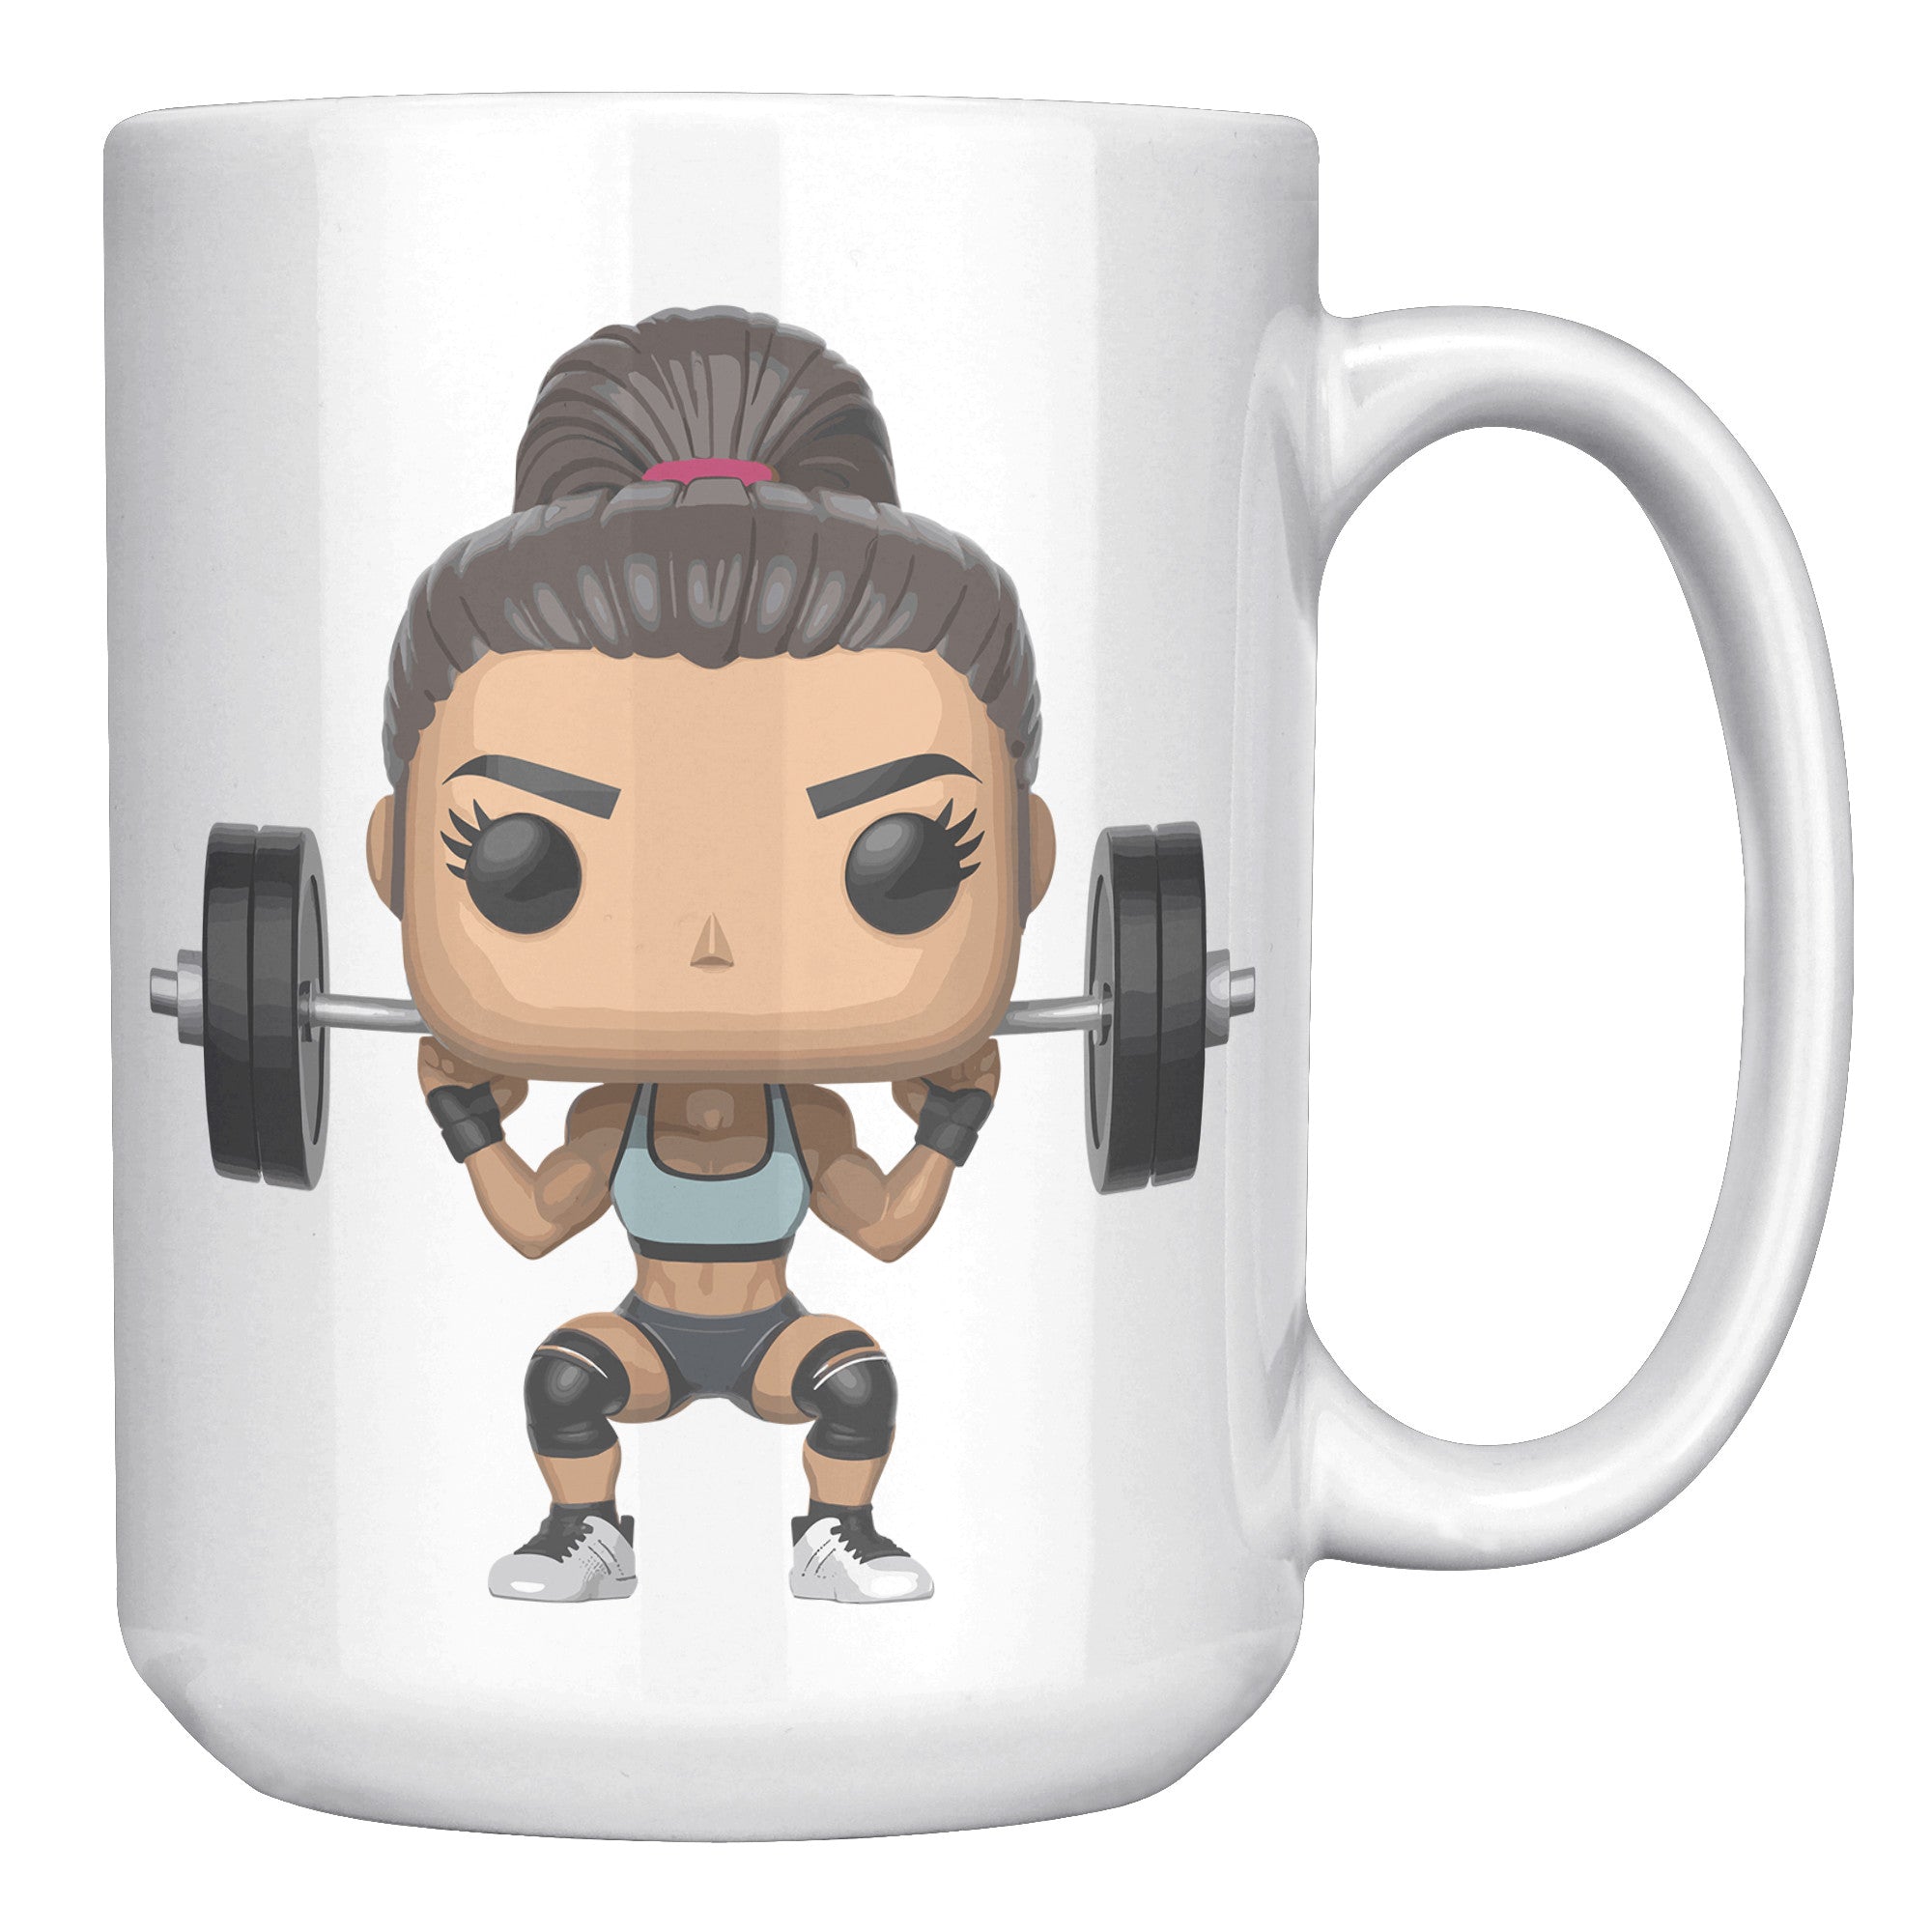 "CrossFit Funko Pop Style Mug - Male Fitness Enthusiast Coffee Cup - Unique Gift for Gym Buffs - Fun Workout-Inspired Drinkware" - C1